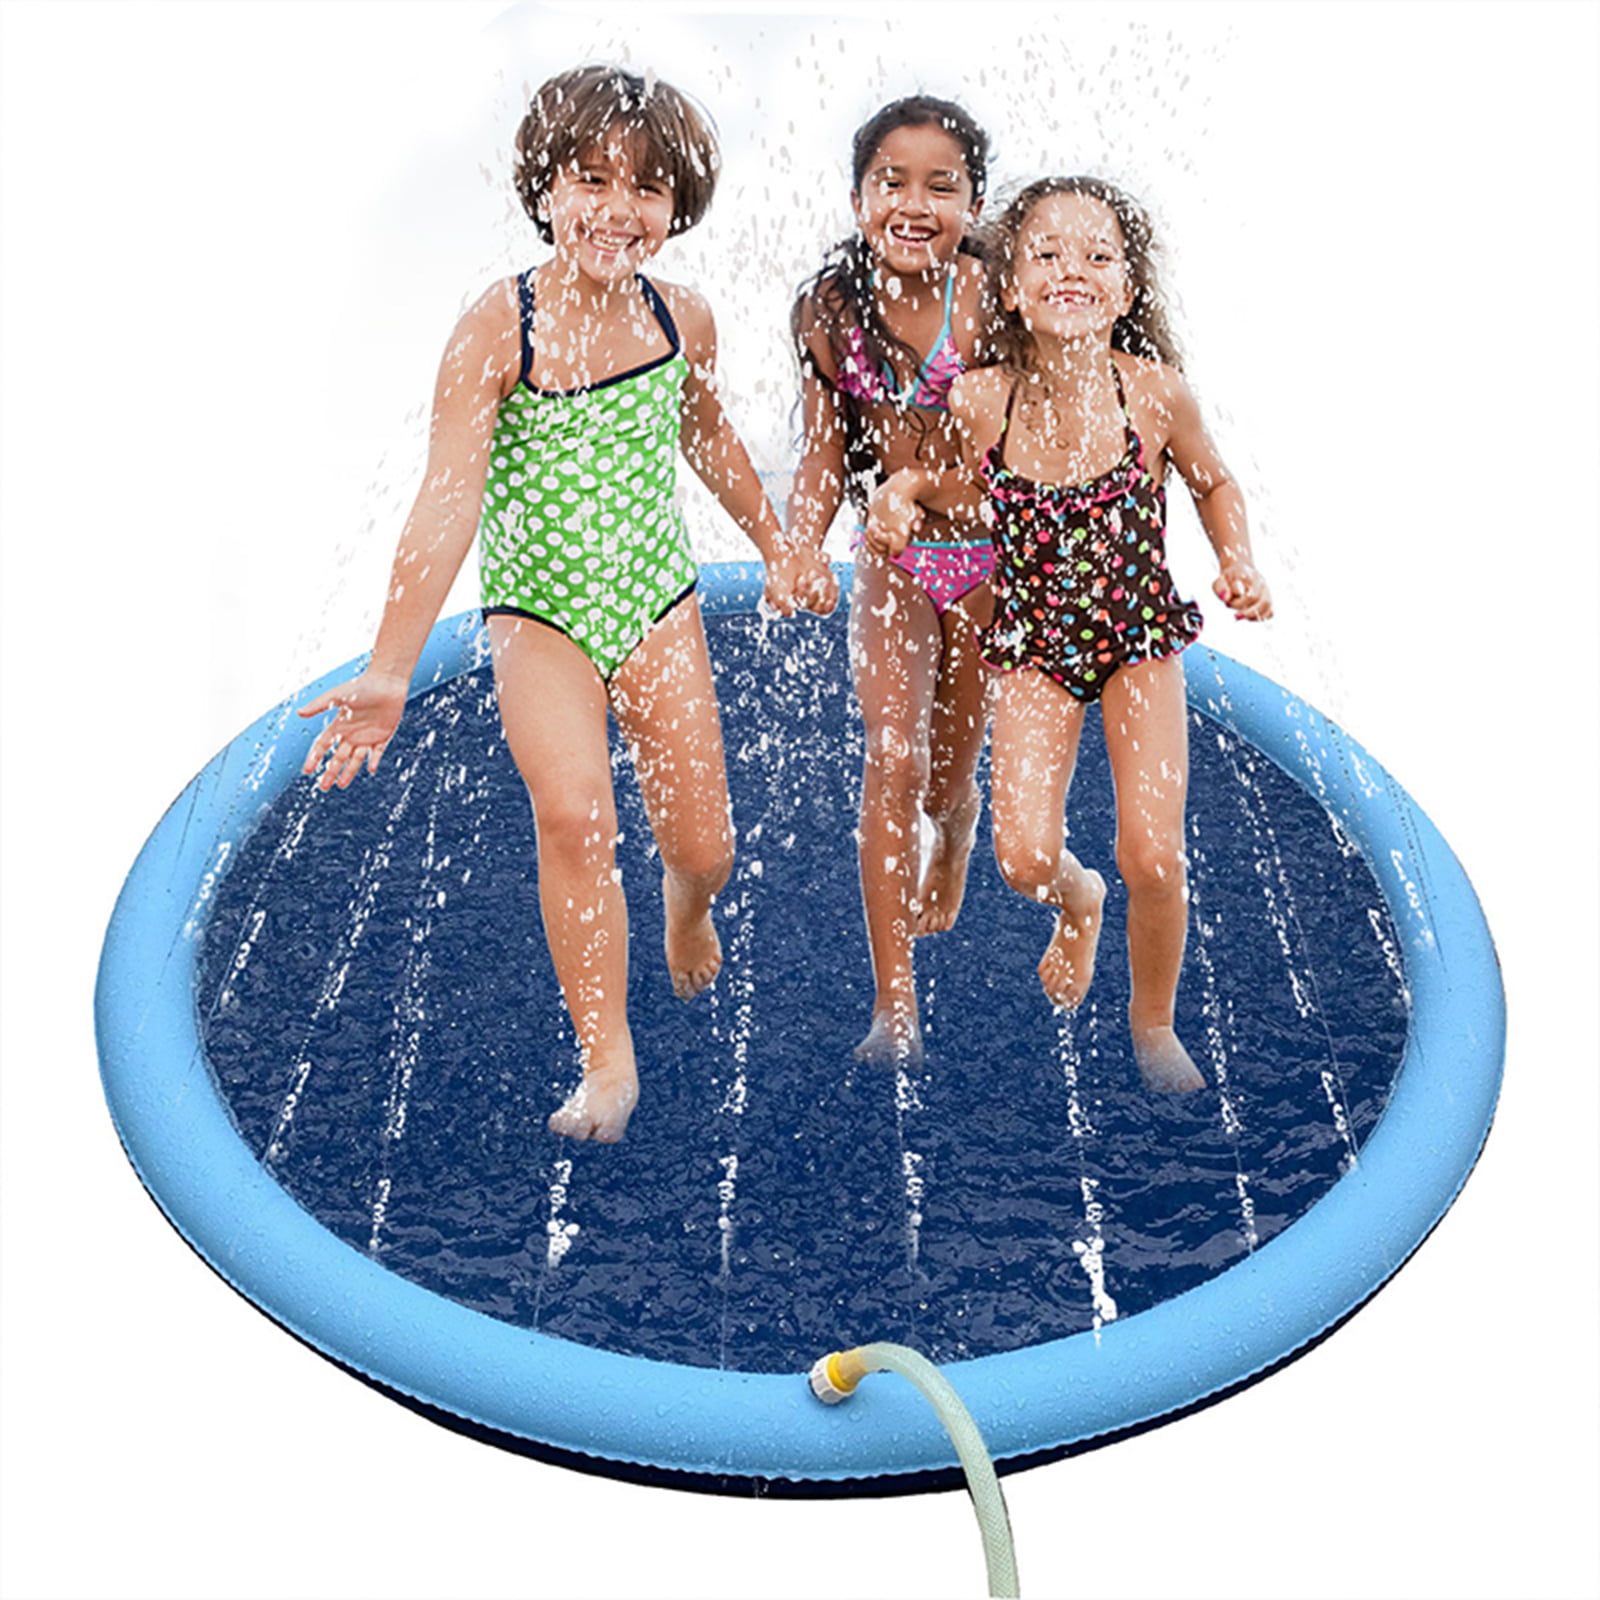 Paddling Pool for Pets and Kids,59 Sprinkle and Splash Water Play Mat,Dogs Paddling Pool Kid’s Summer Toys Spray Pad,Garden Outdoor Portable Sprinkler Play Mat Outside 